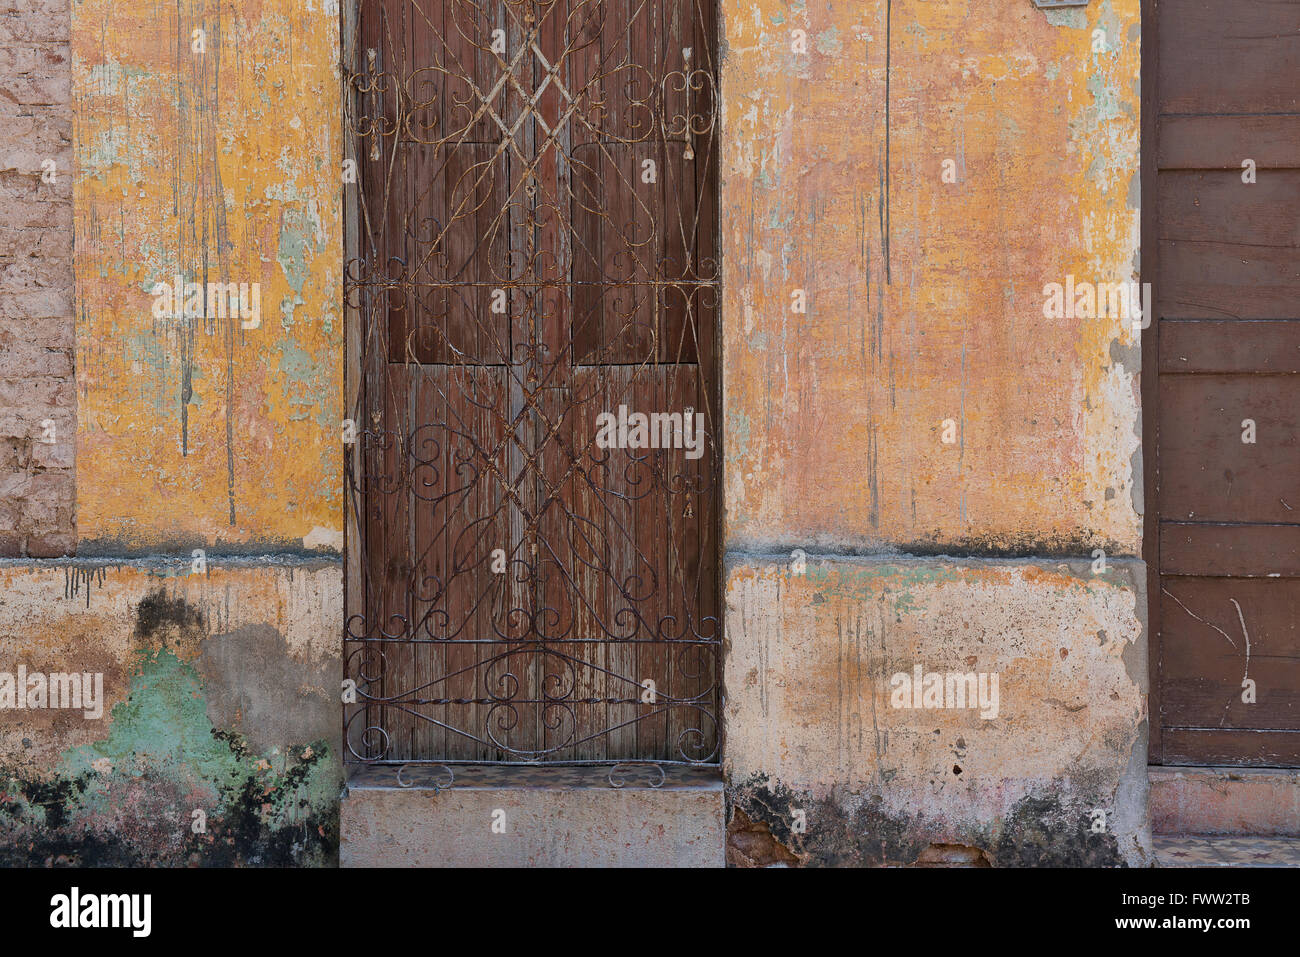 A wall of different colors and textures in the old Cuban town of Trinidad. Stock Photo